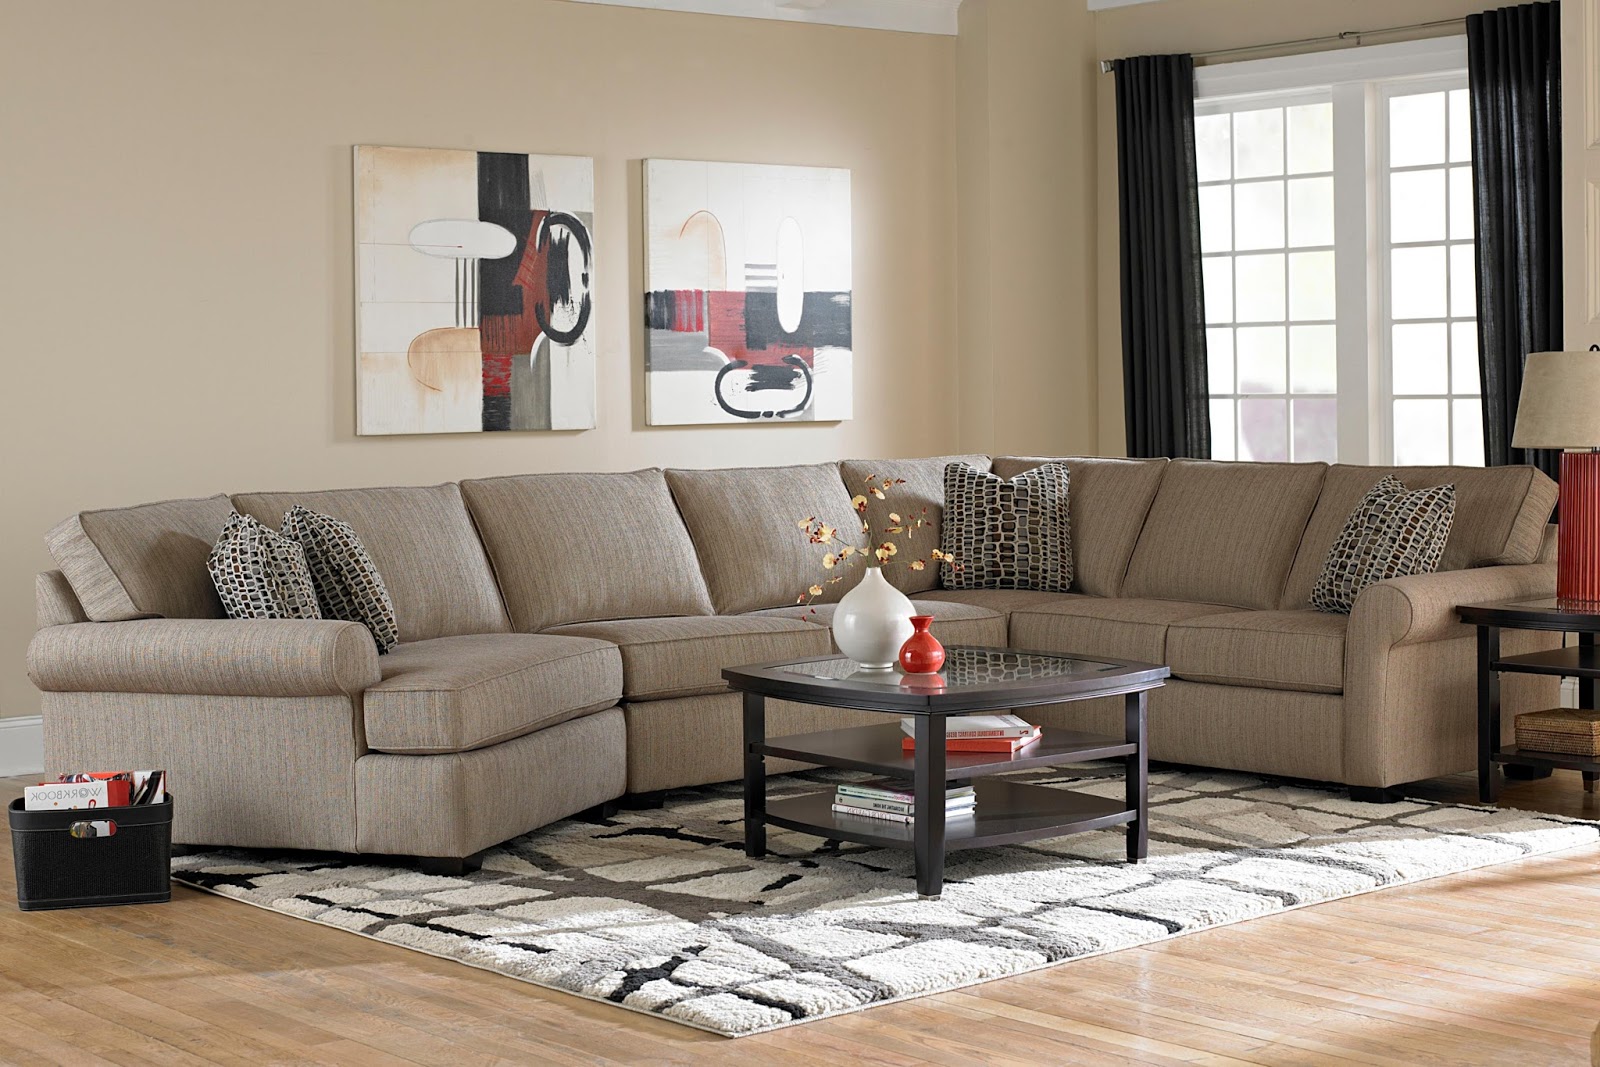 Baer S Furnishing Get Versatile Seating With A Sectional Sofa